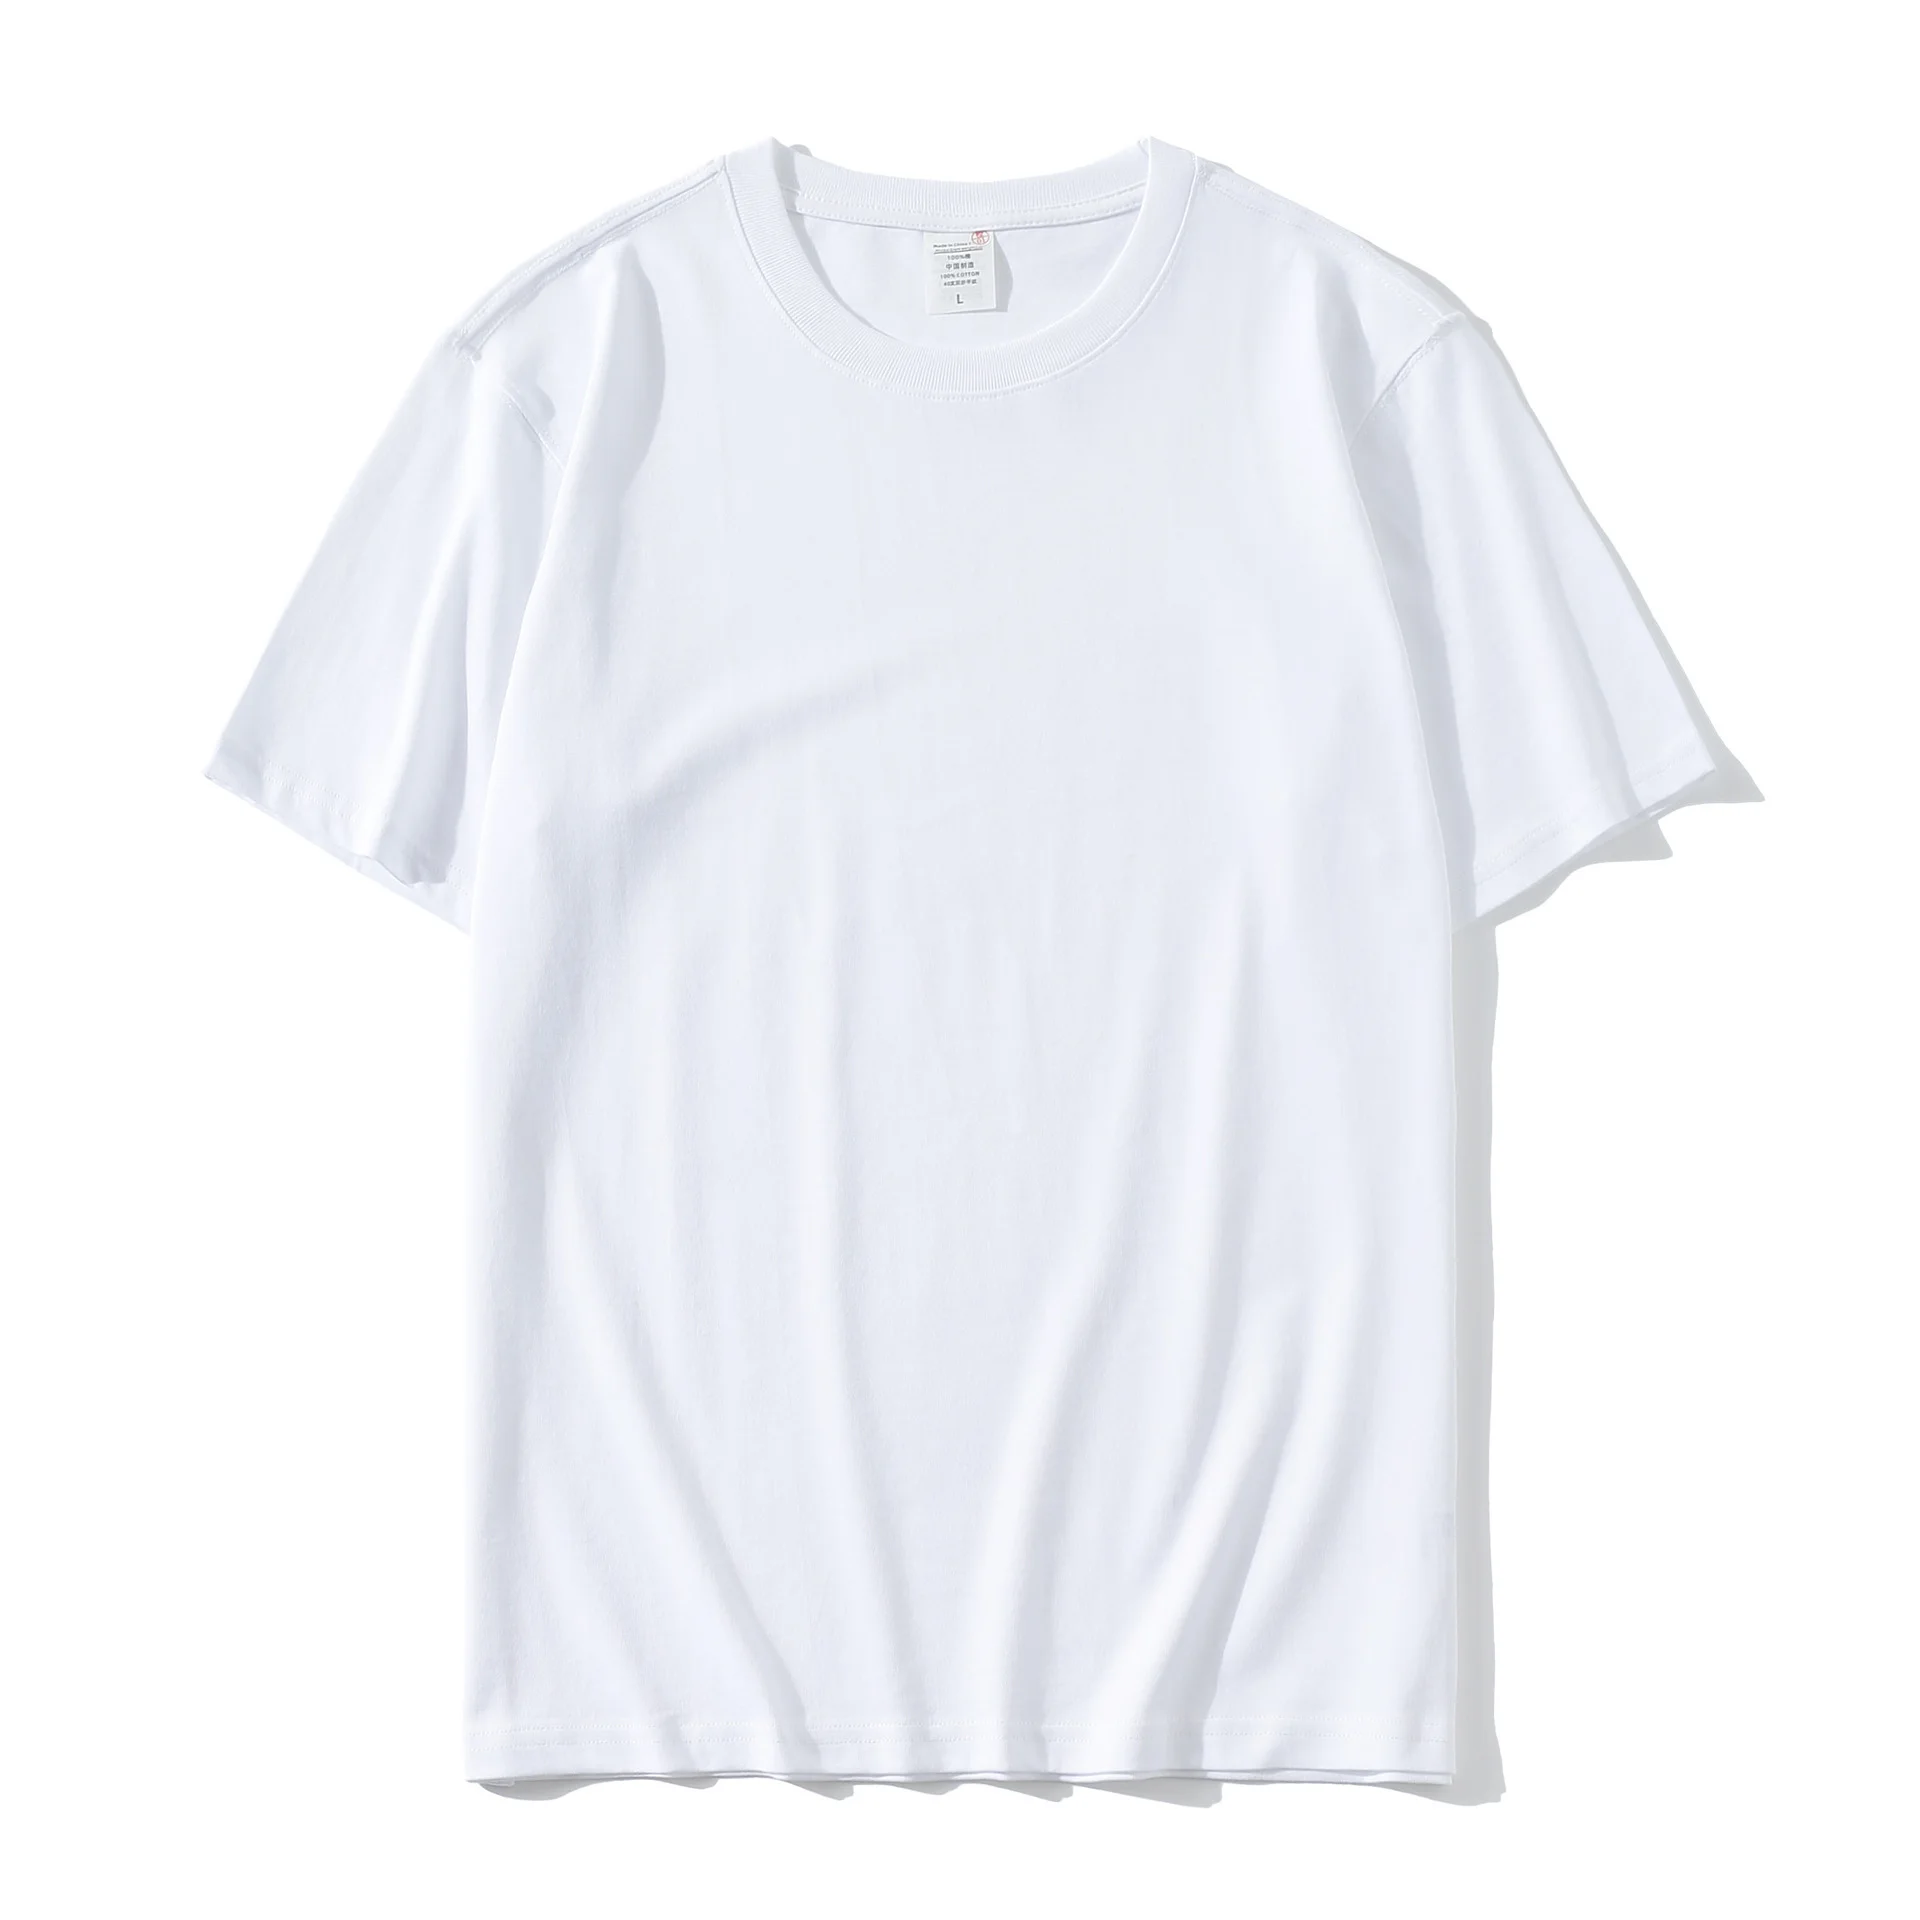 Wholesale Blank T shirts for Printing in Bari